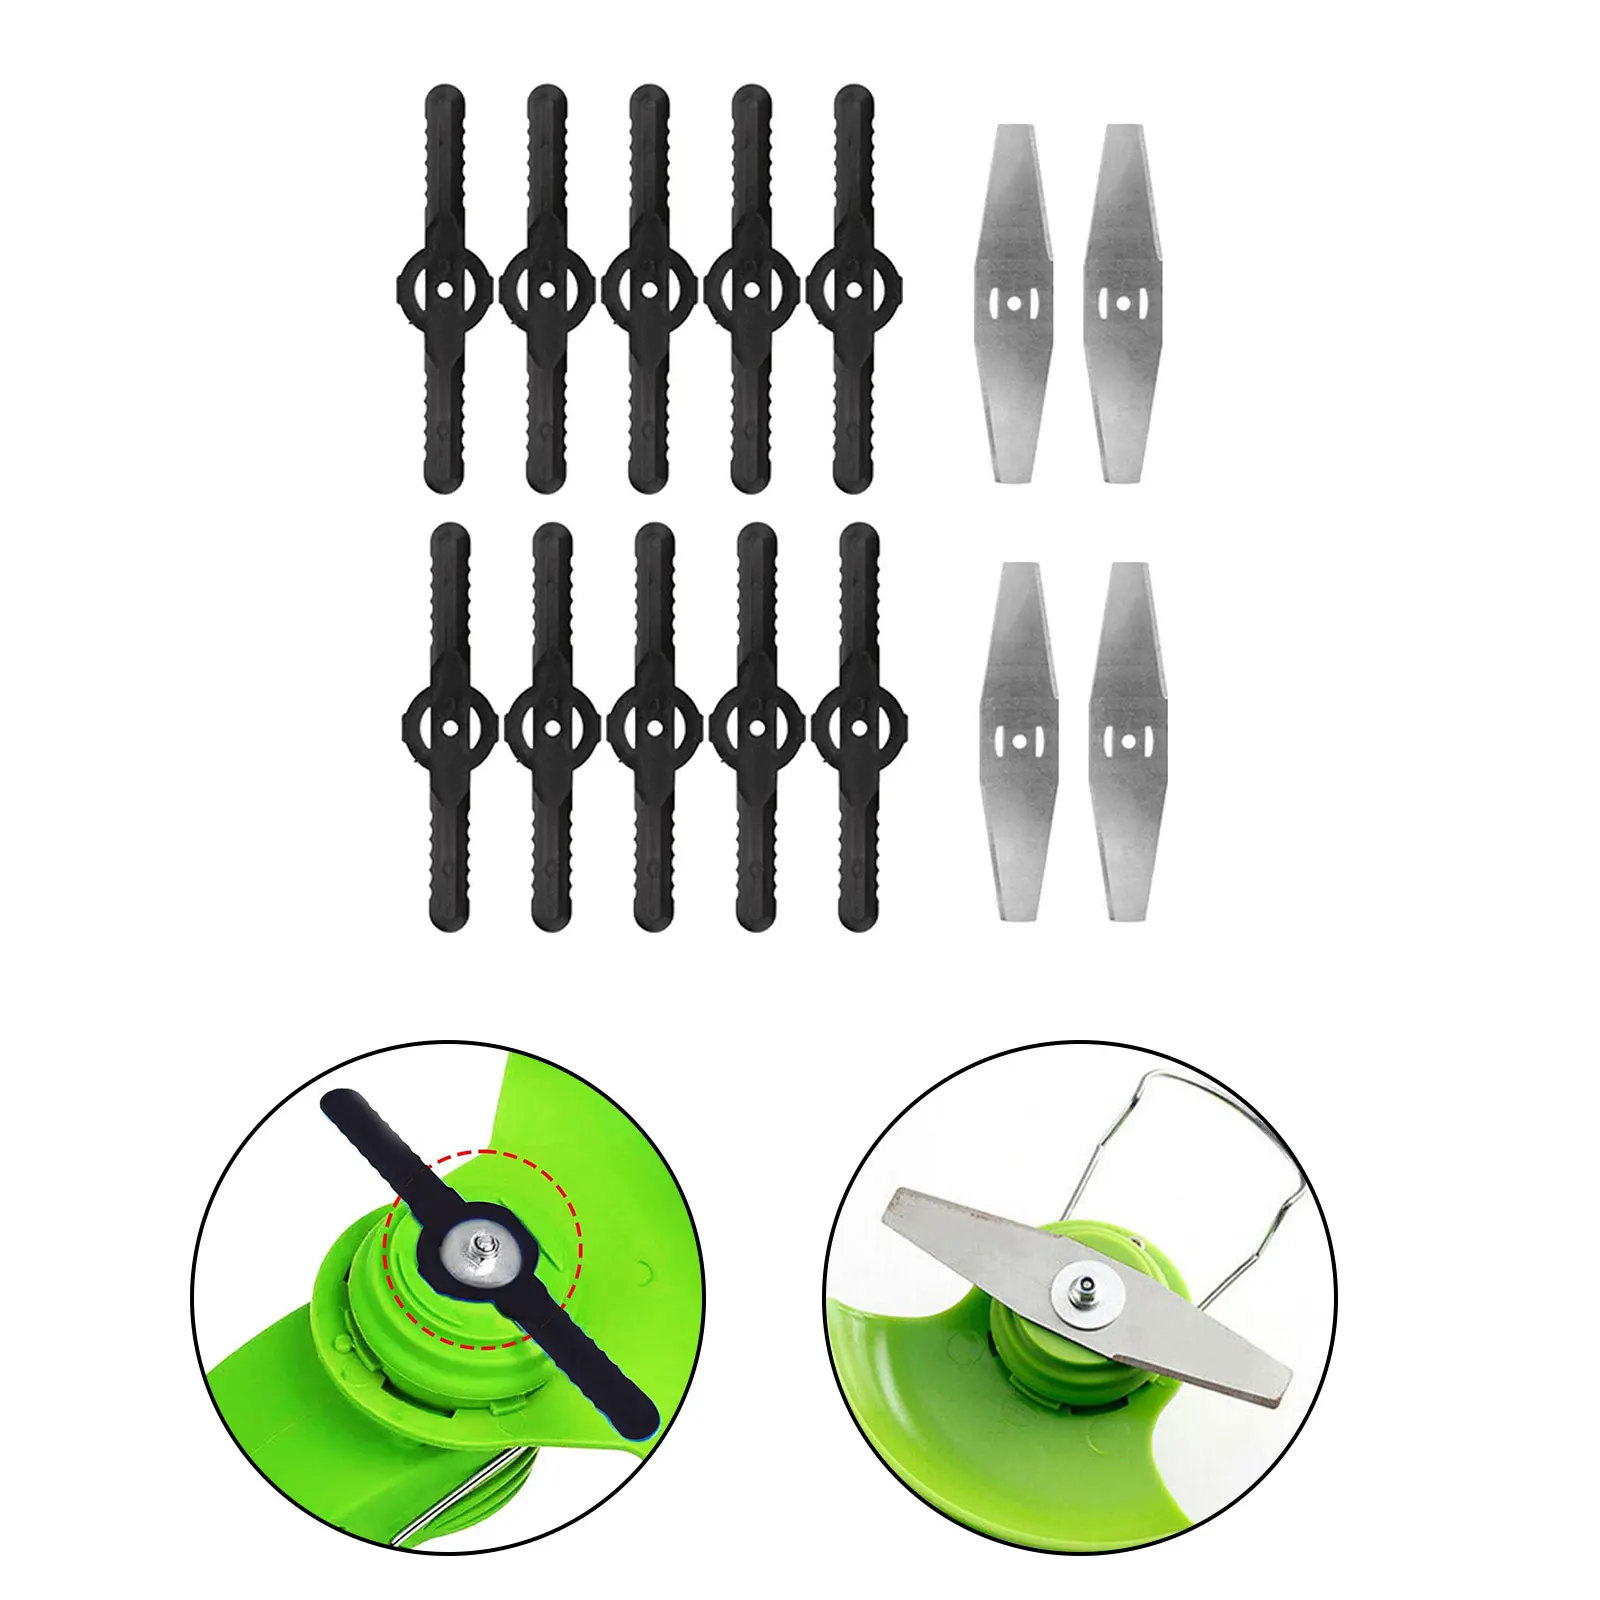 

14pcs Grass Trimmer Blade Brushcutter Head Saw Blades For Electric Lawn Mower Lawnmower Parts Lawn Mower Fittings Accessories